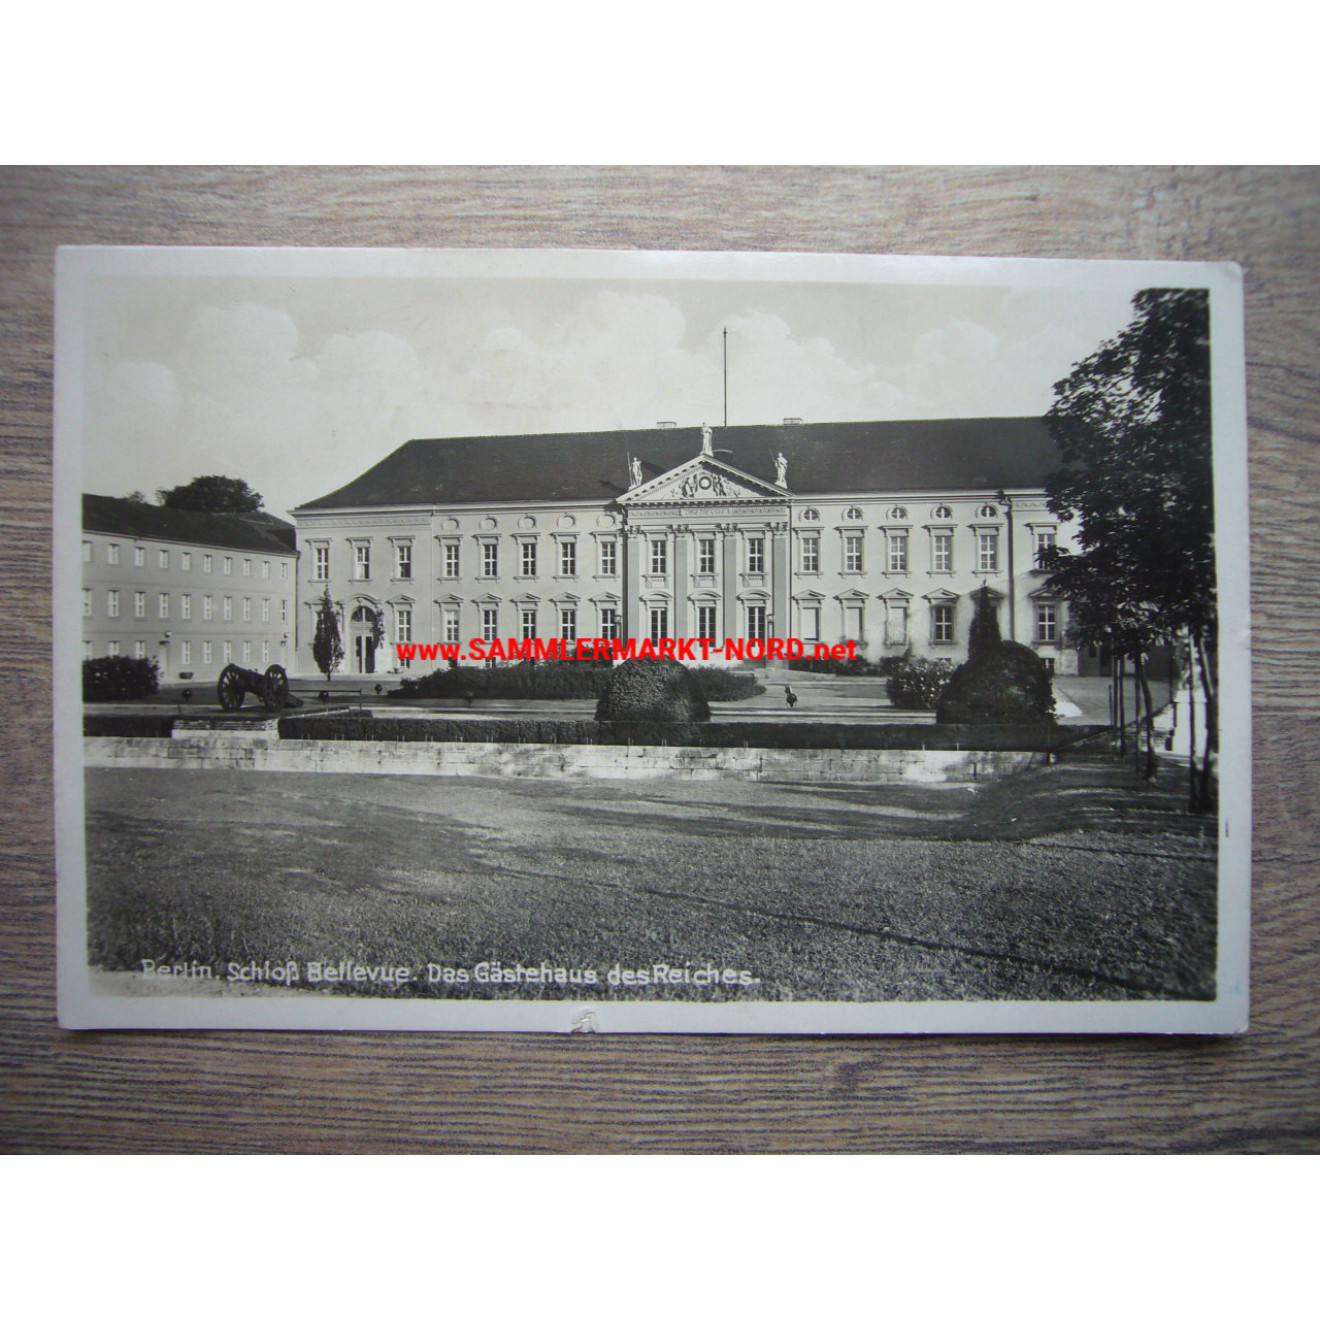 Berlin - Bellevue Palace - The Guest House of the Reich